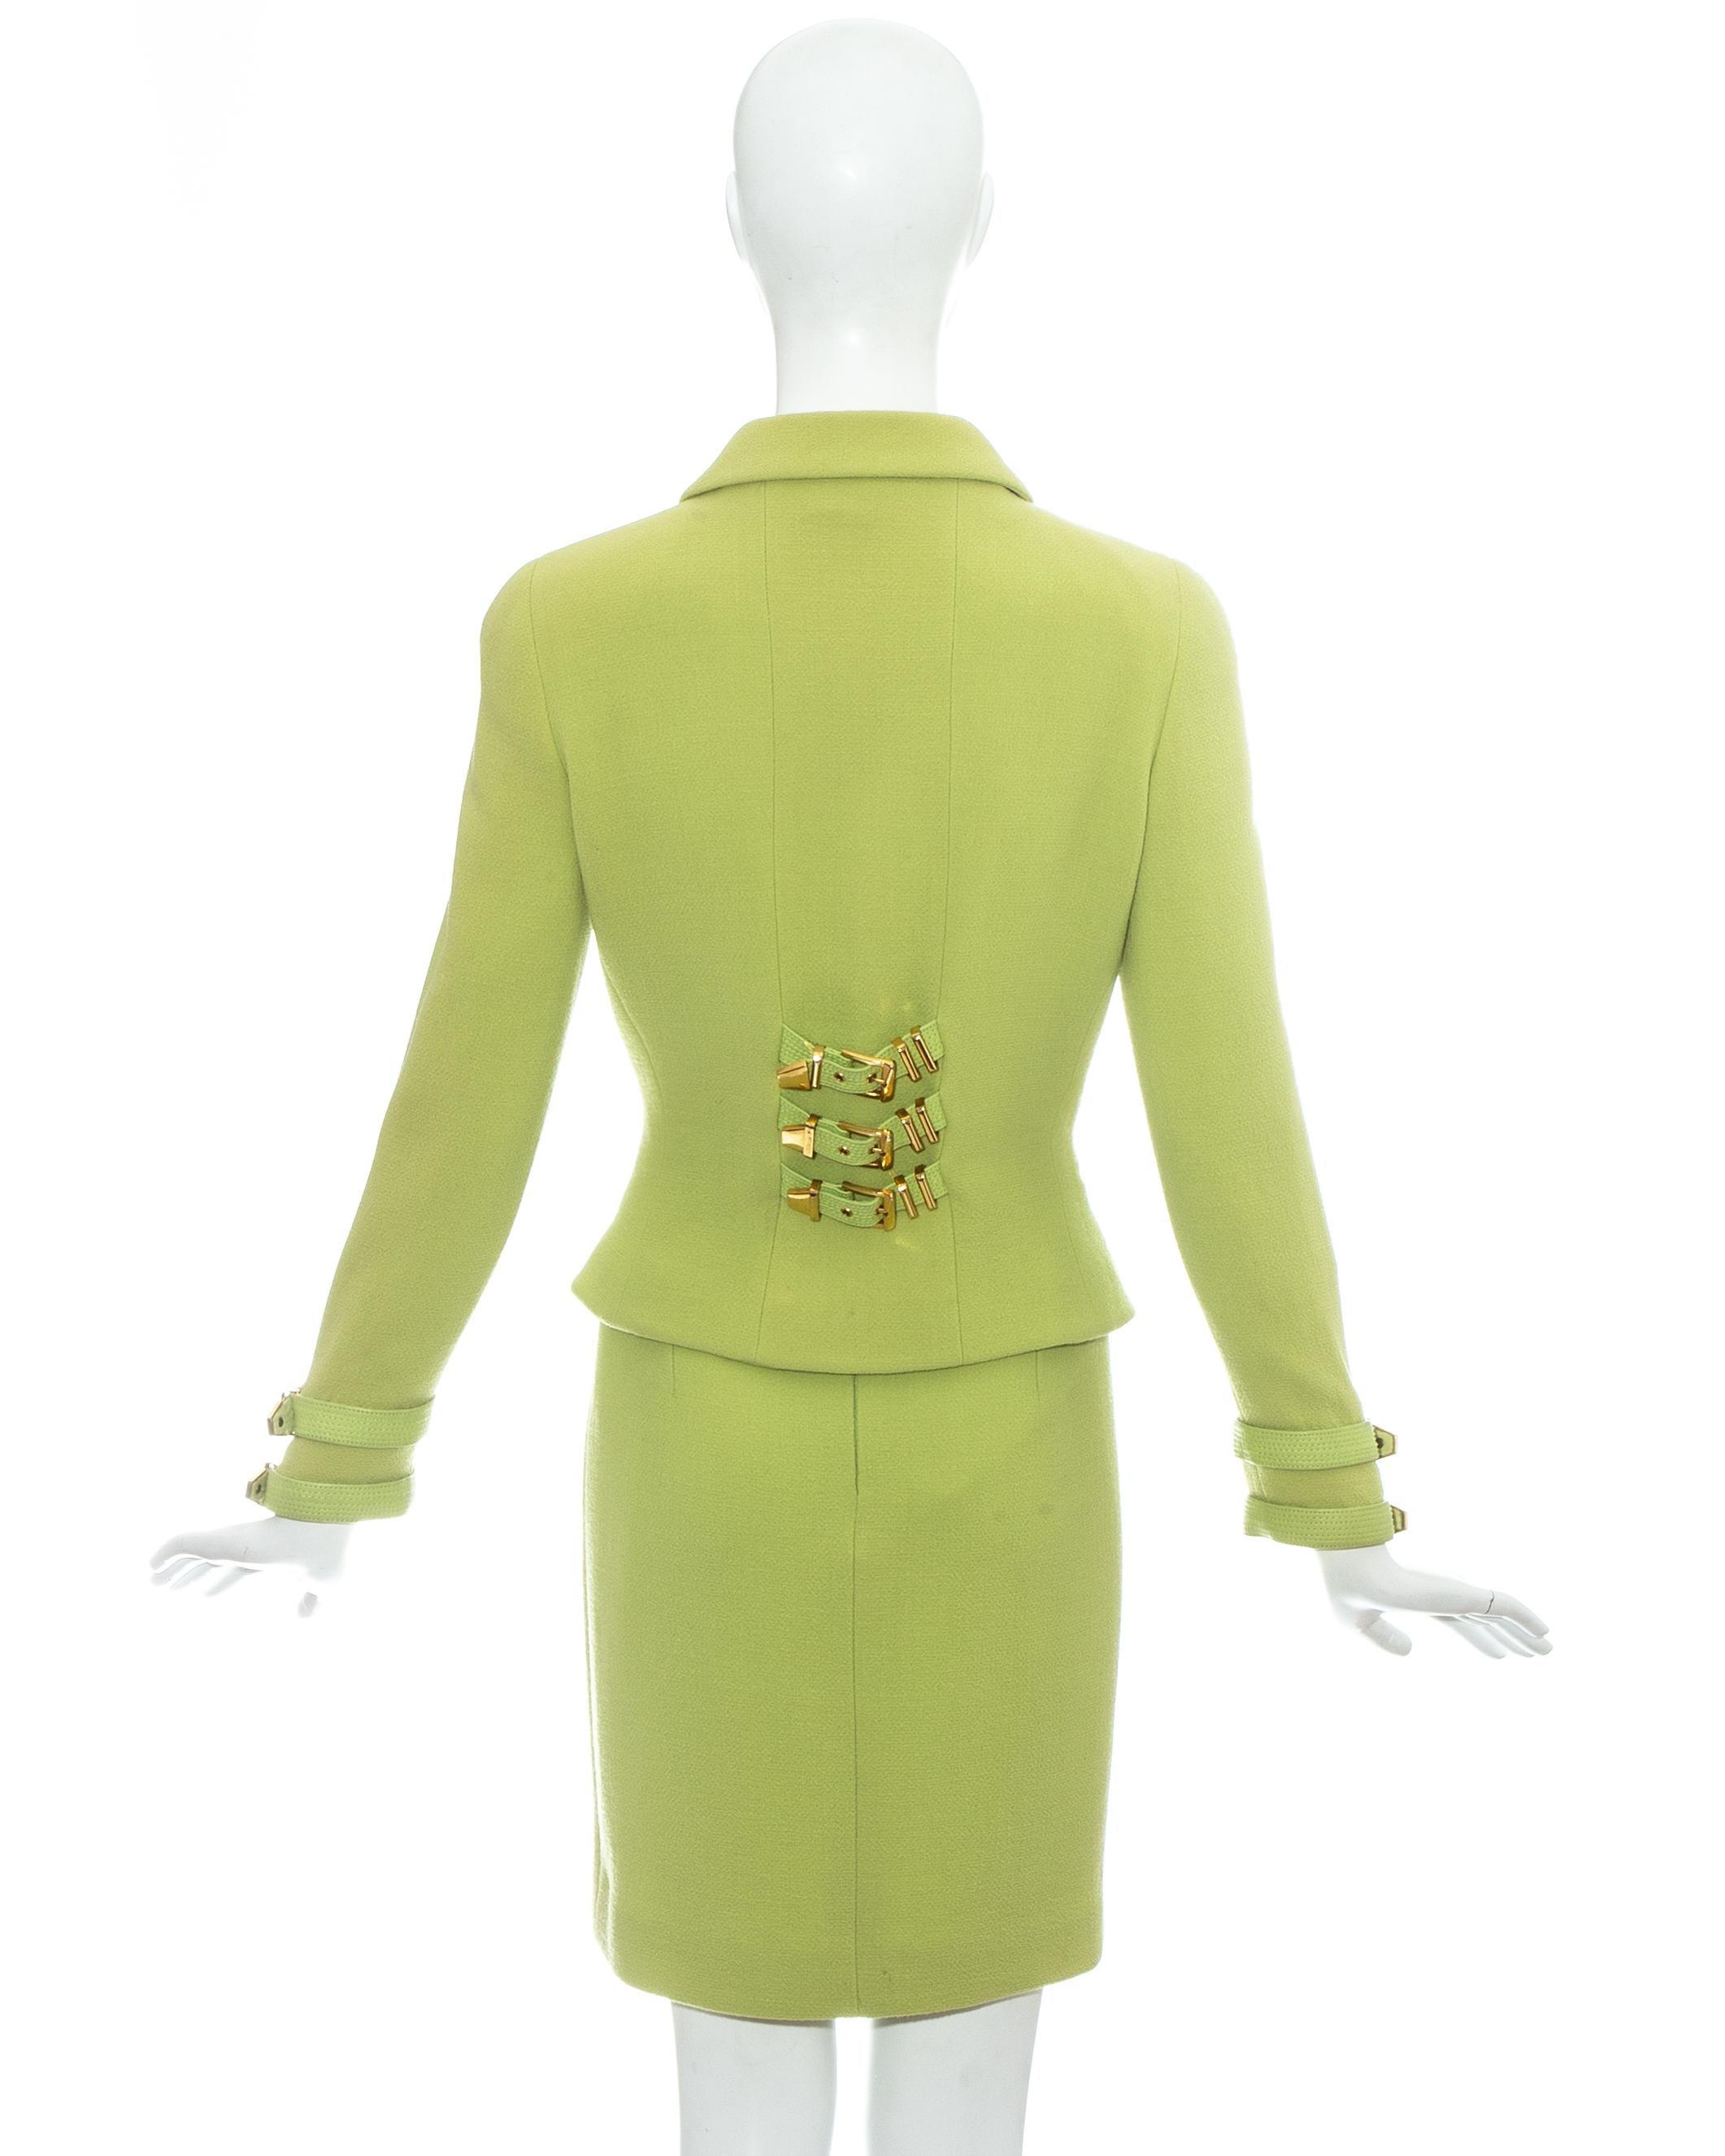 Women's Gianni Versace lime green wool and leather buckle bondage skirt suit, fw 1992